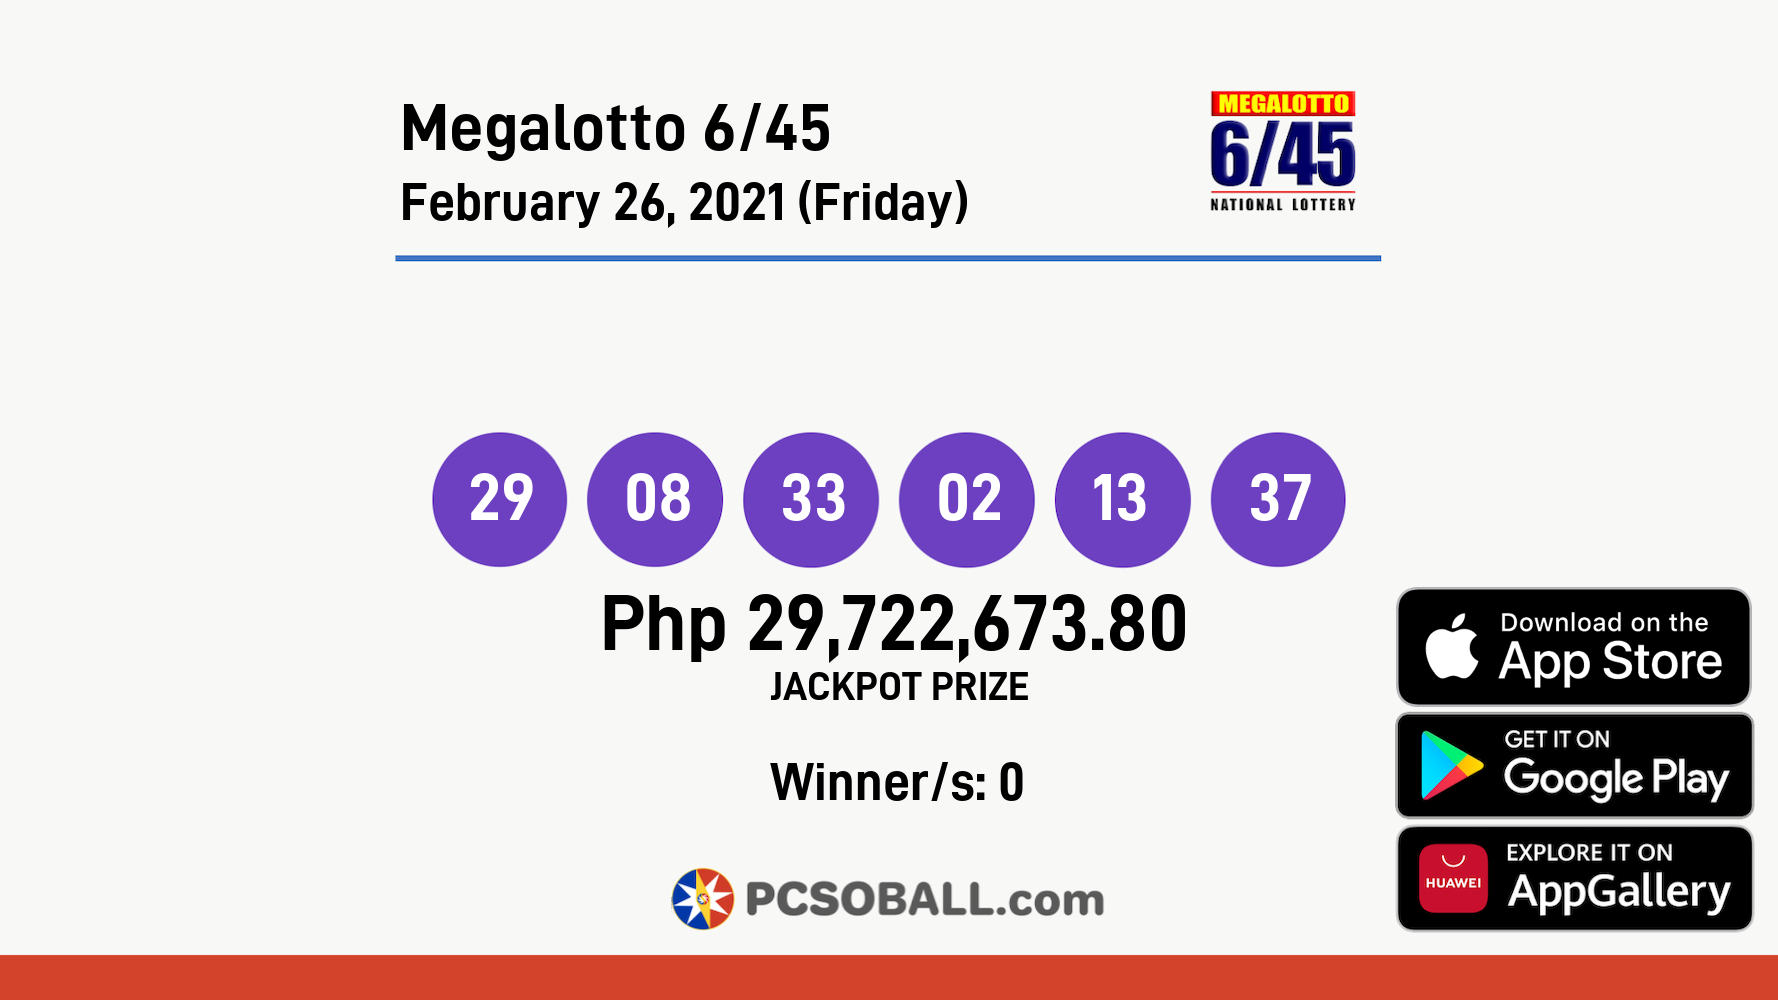 Megalotto 6/45 February 26, 2021 (Friday) Result